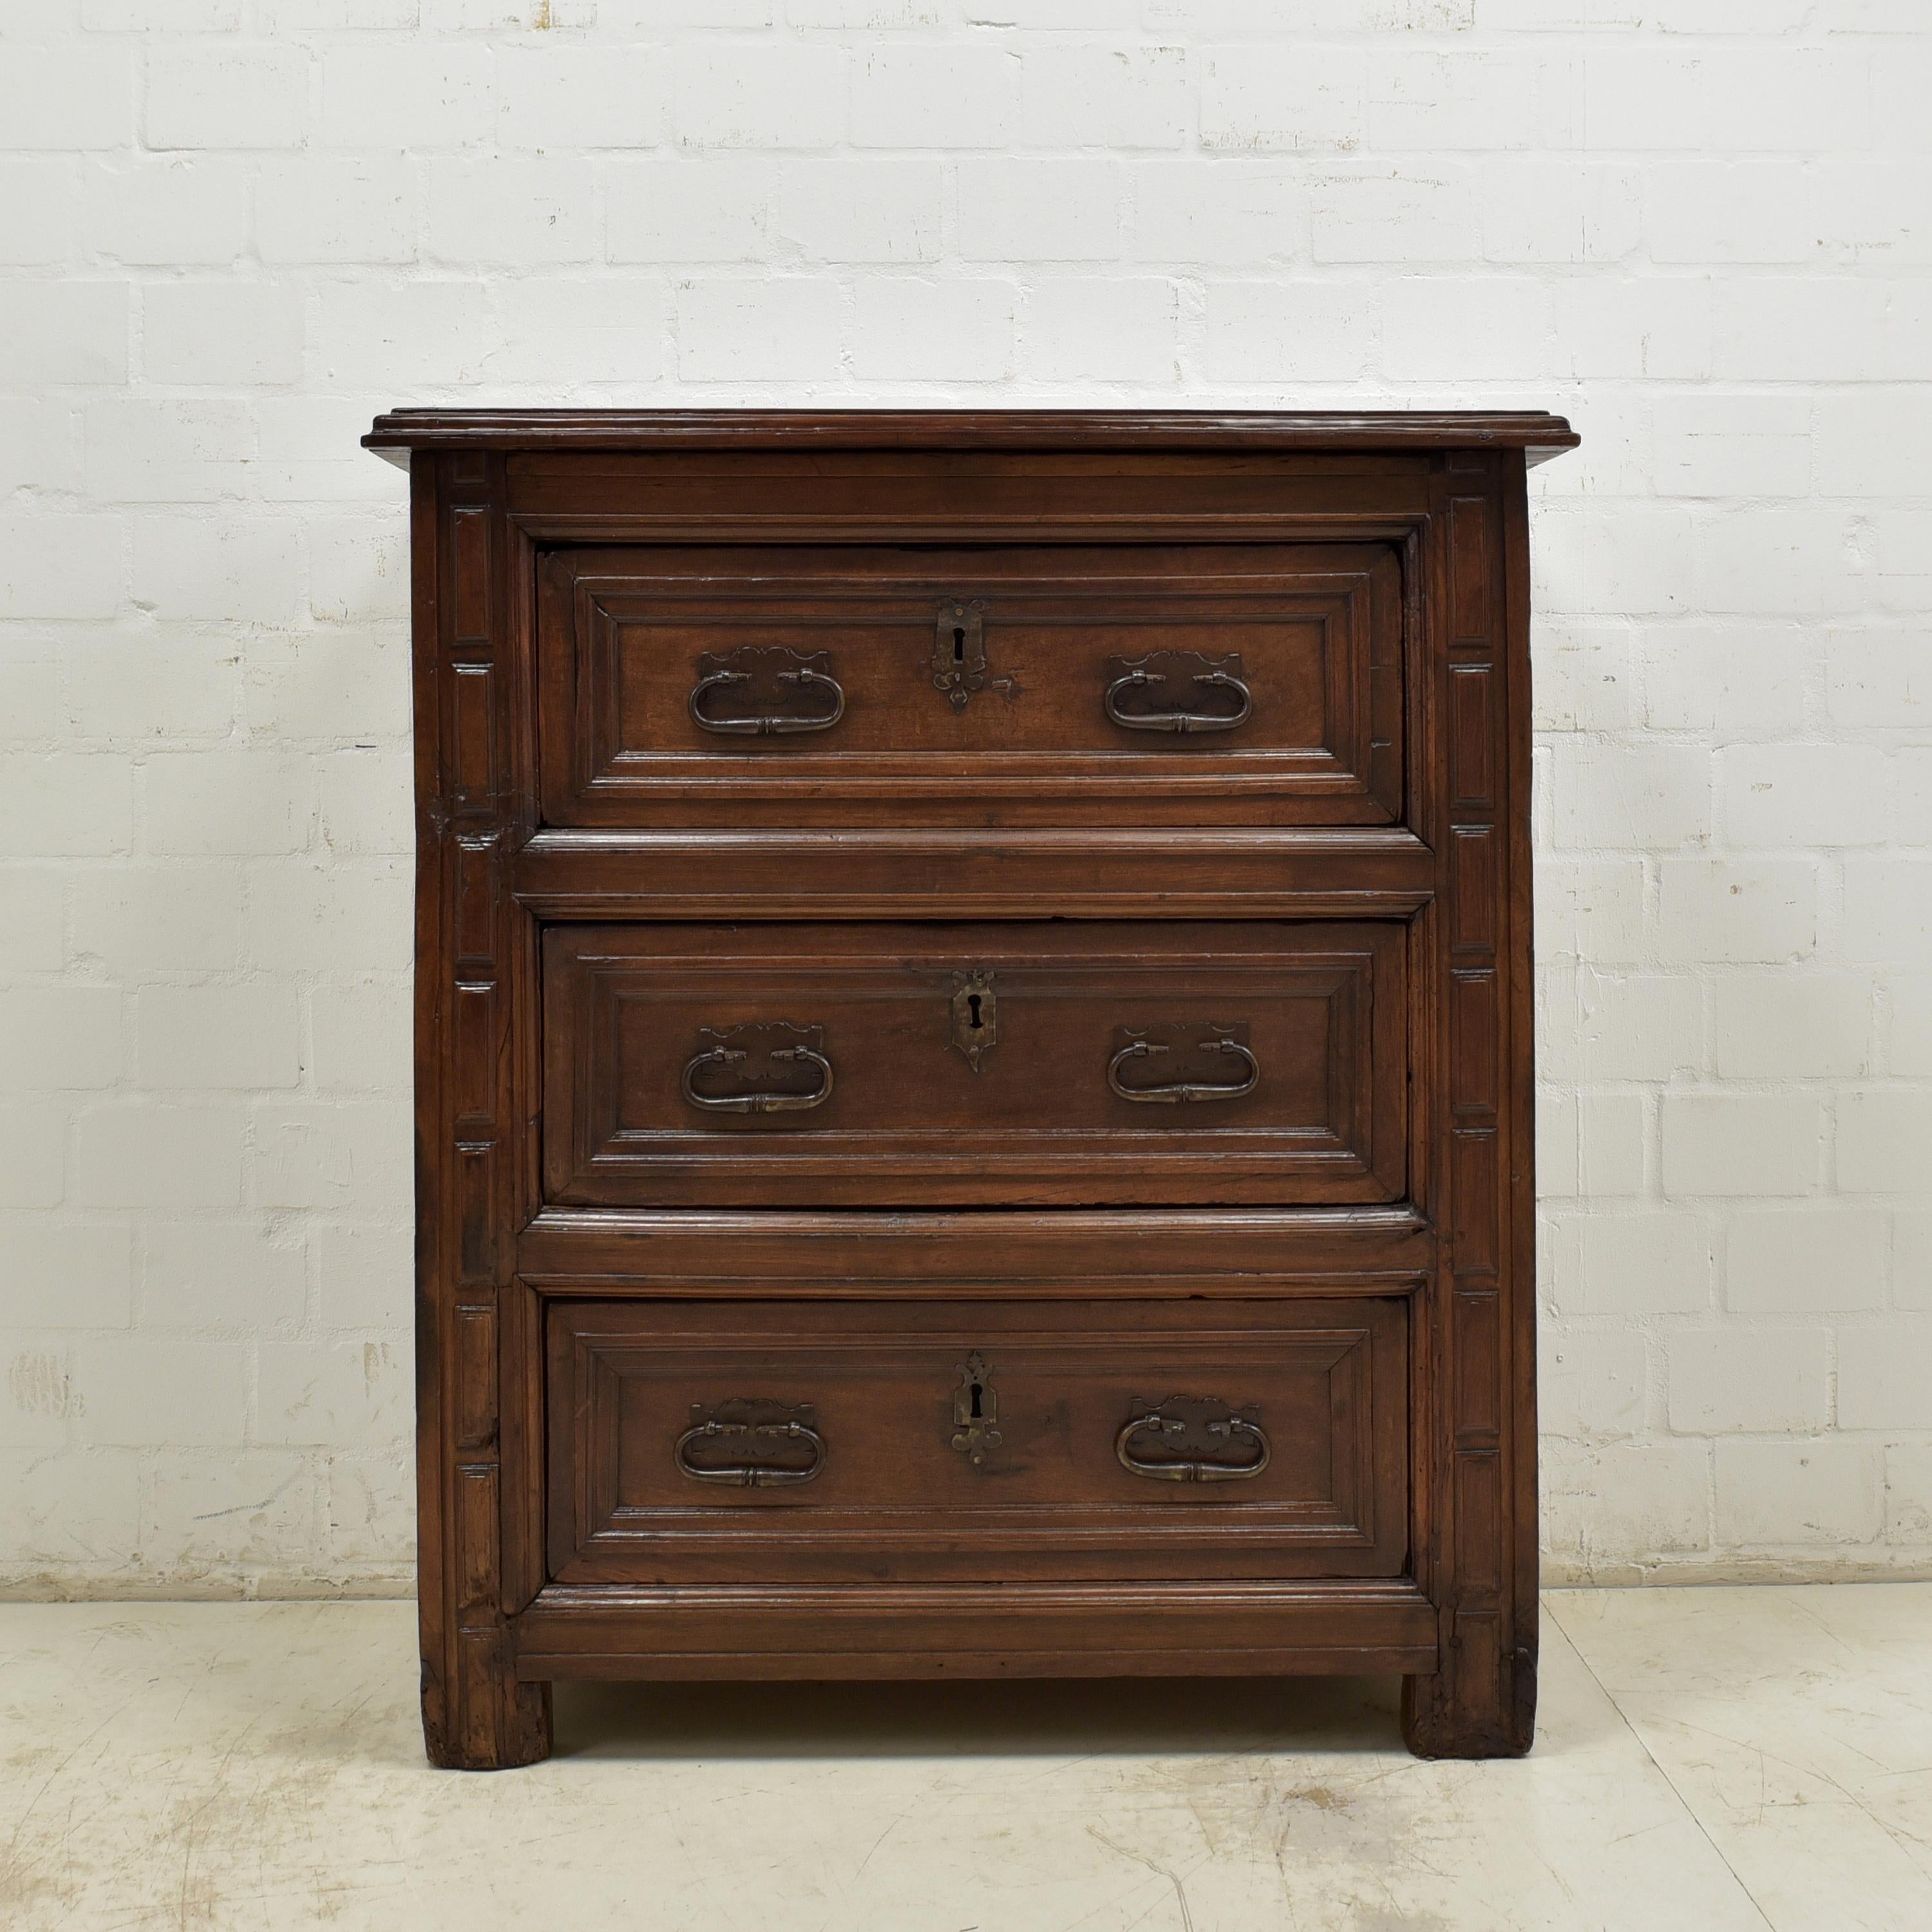 High chest of drawers restored Spain around 1700 walnut

Features:
Mid-height model with three drawers
Heavy quality
Cassette fillings
Drawers pronged
Original handles
Very nice patina
Very charming, ancient model

Additional